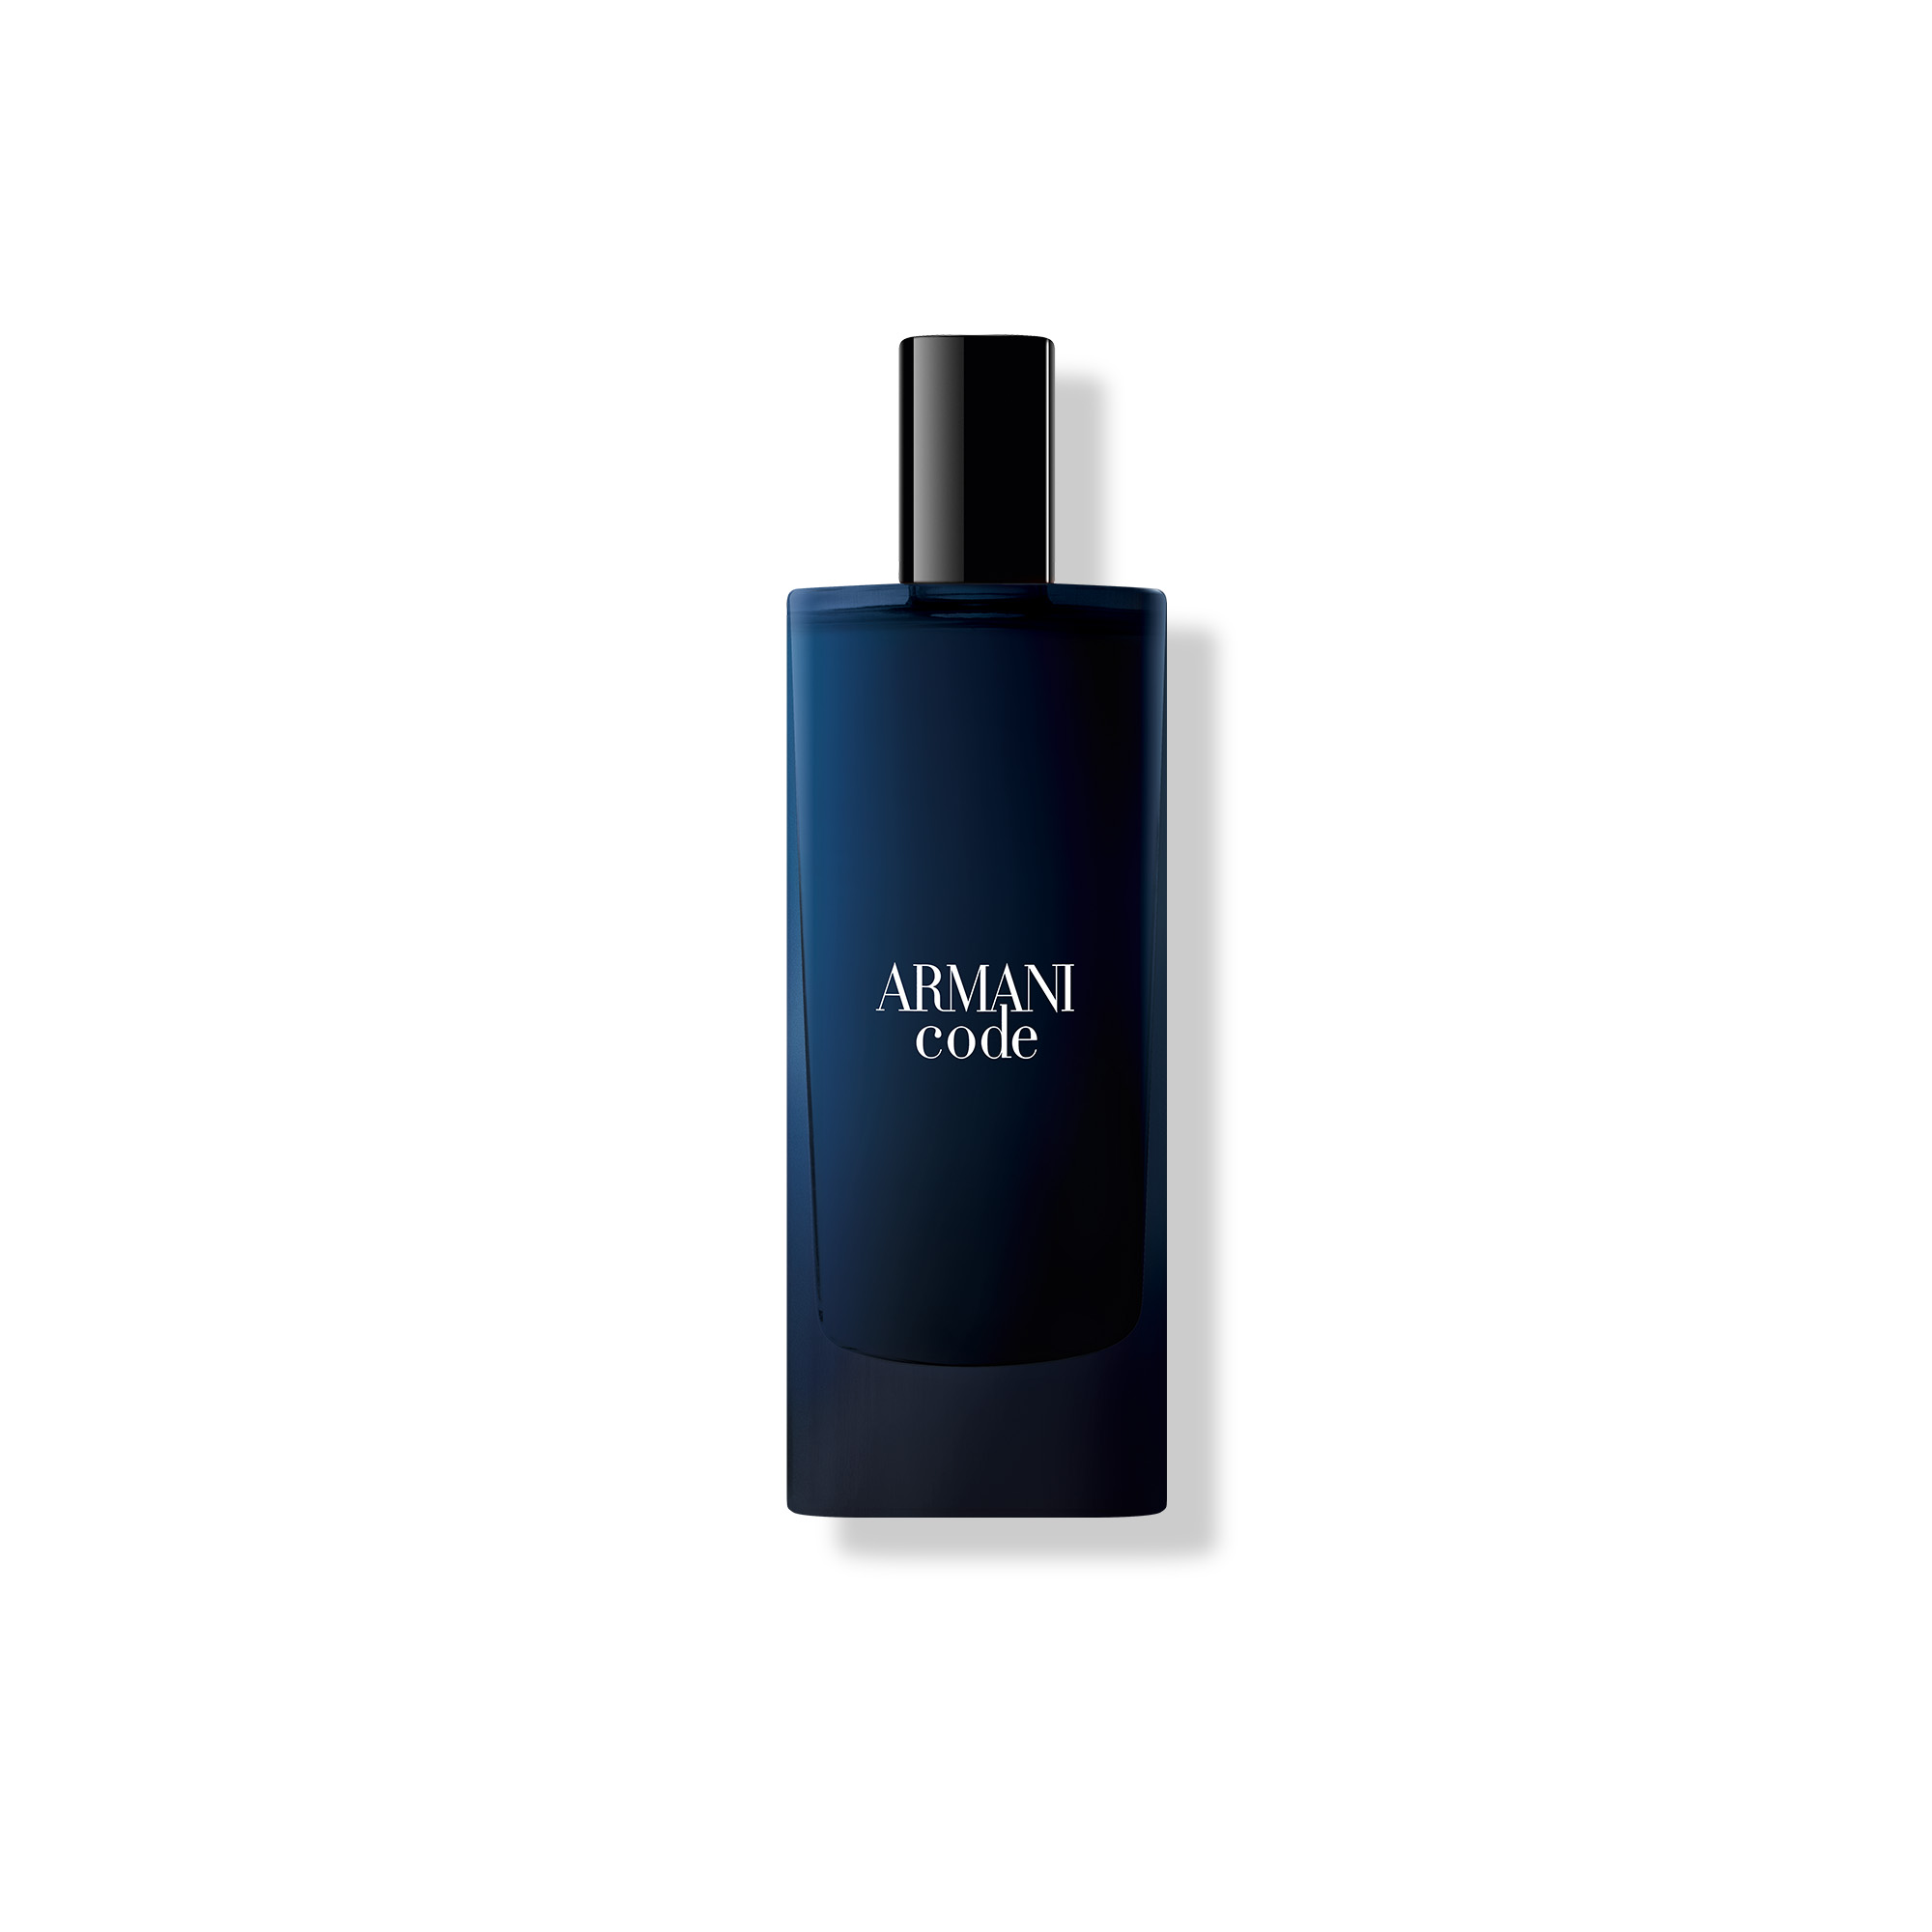 Receive a free gift with every 75ml purchase of Armani Code